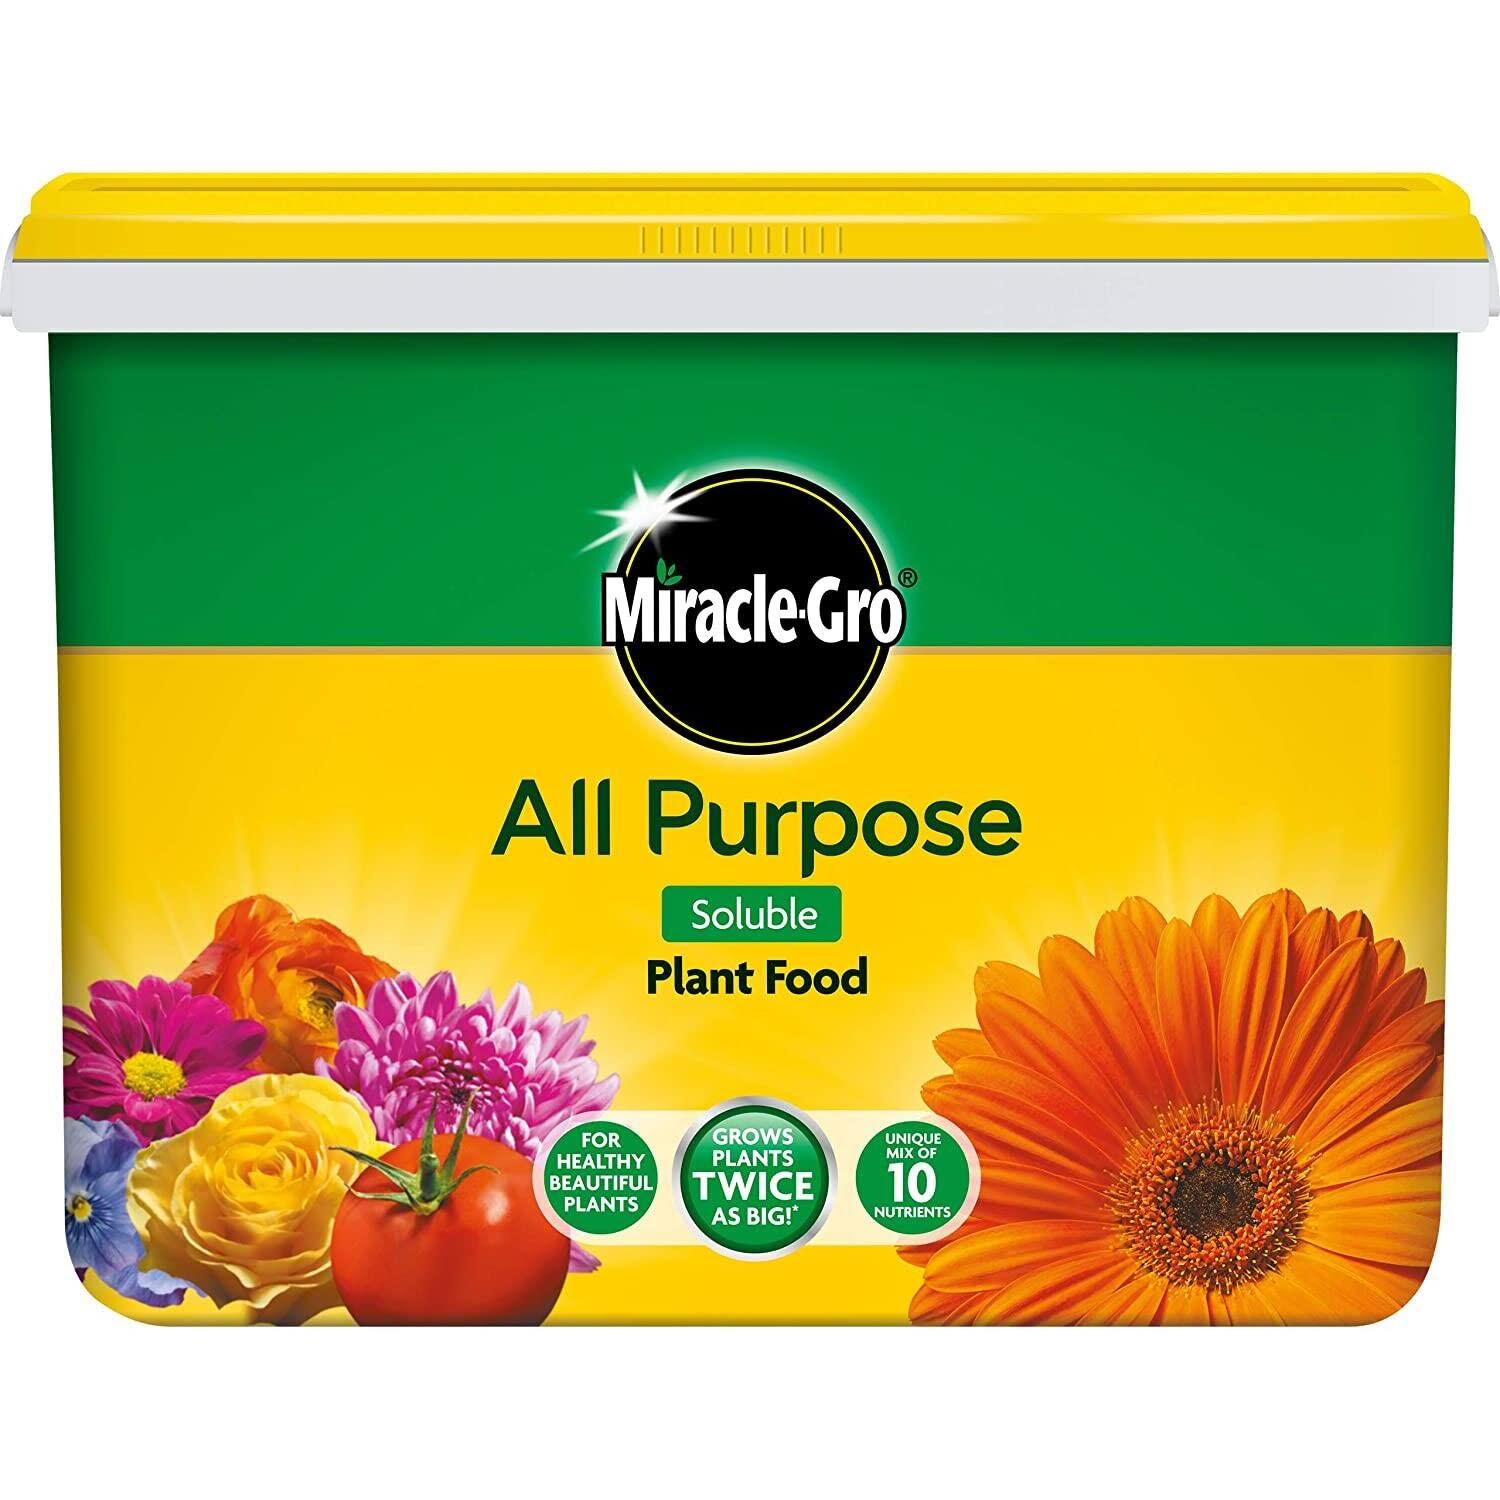 Miracle Gro All Purpose Soluble Plant Food - 2kg